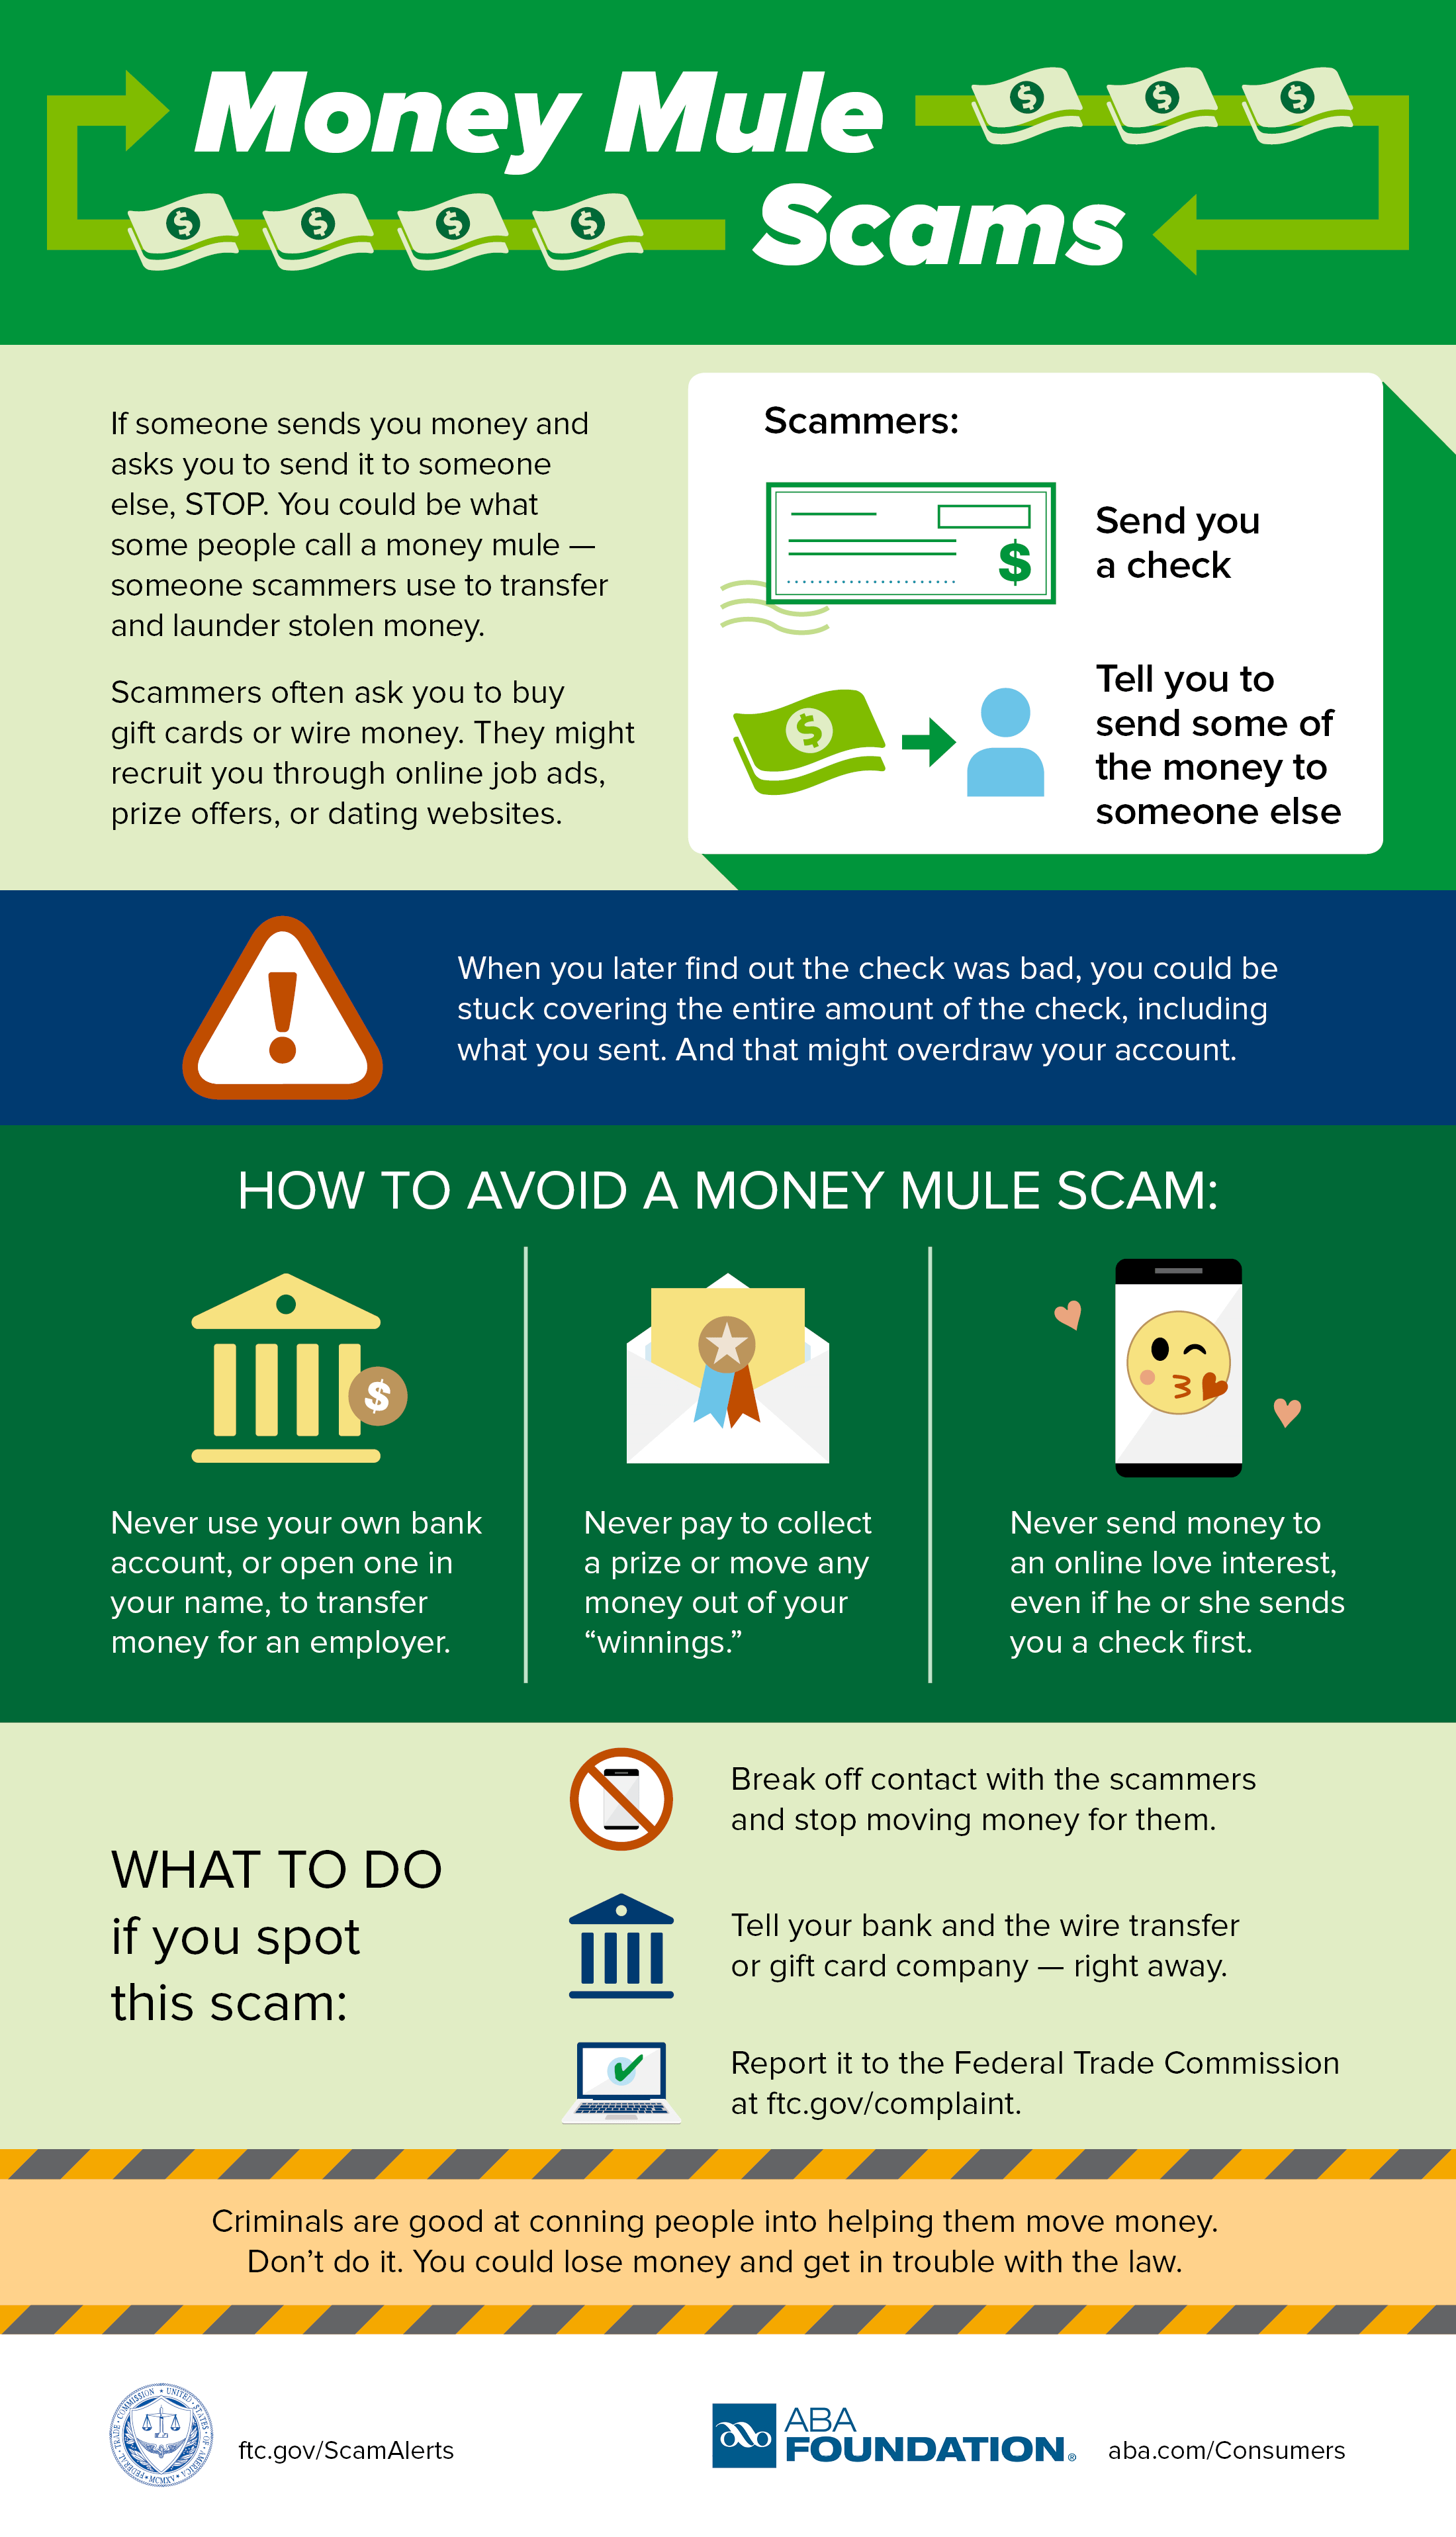 Avoid becoming a money mule!